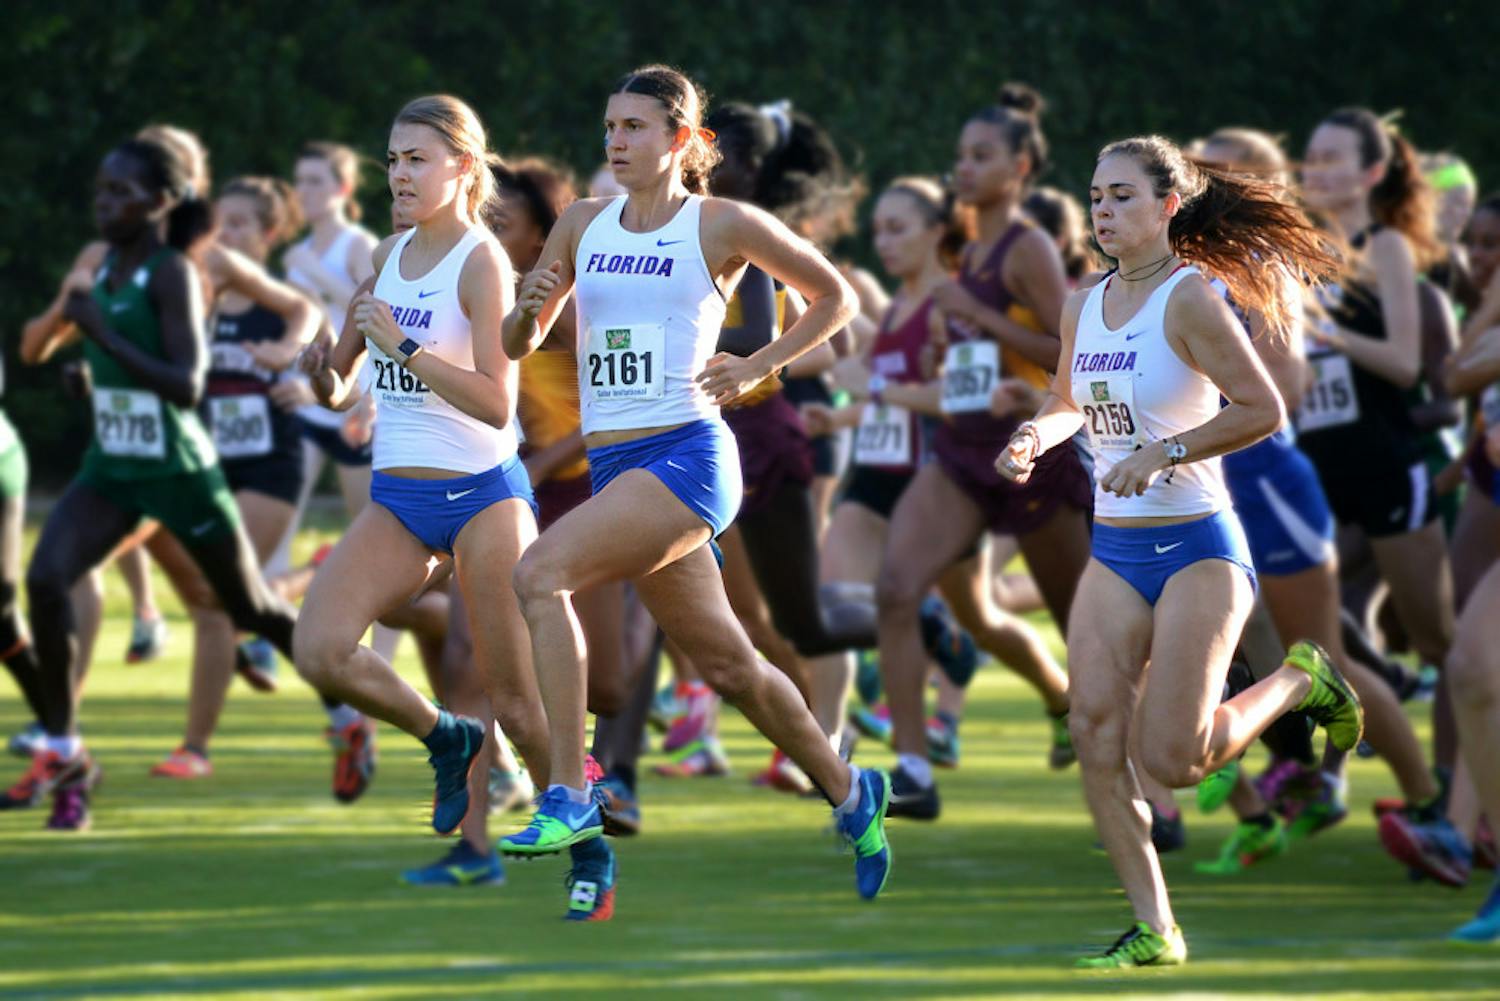 Seven runners finished in the women's top 10 during the North Florida Invitational, including Imogen Barrett, who won the event.